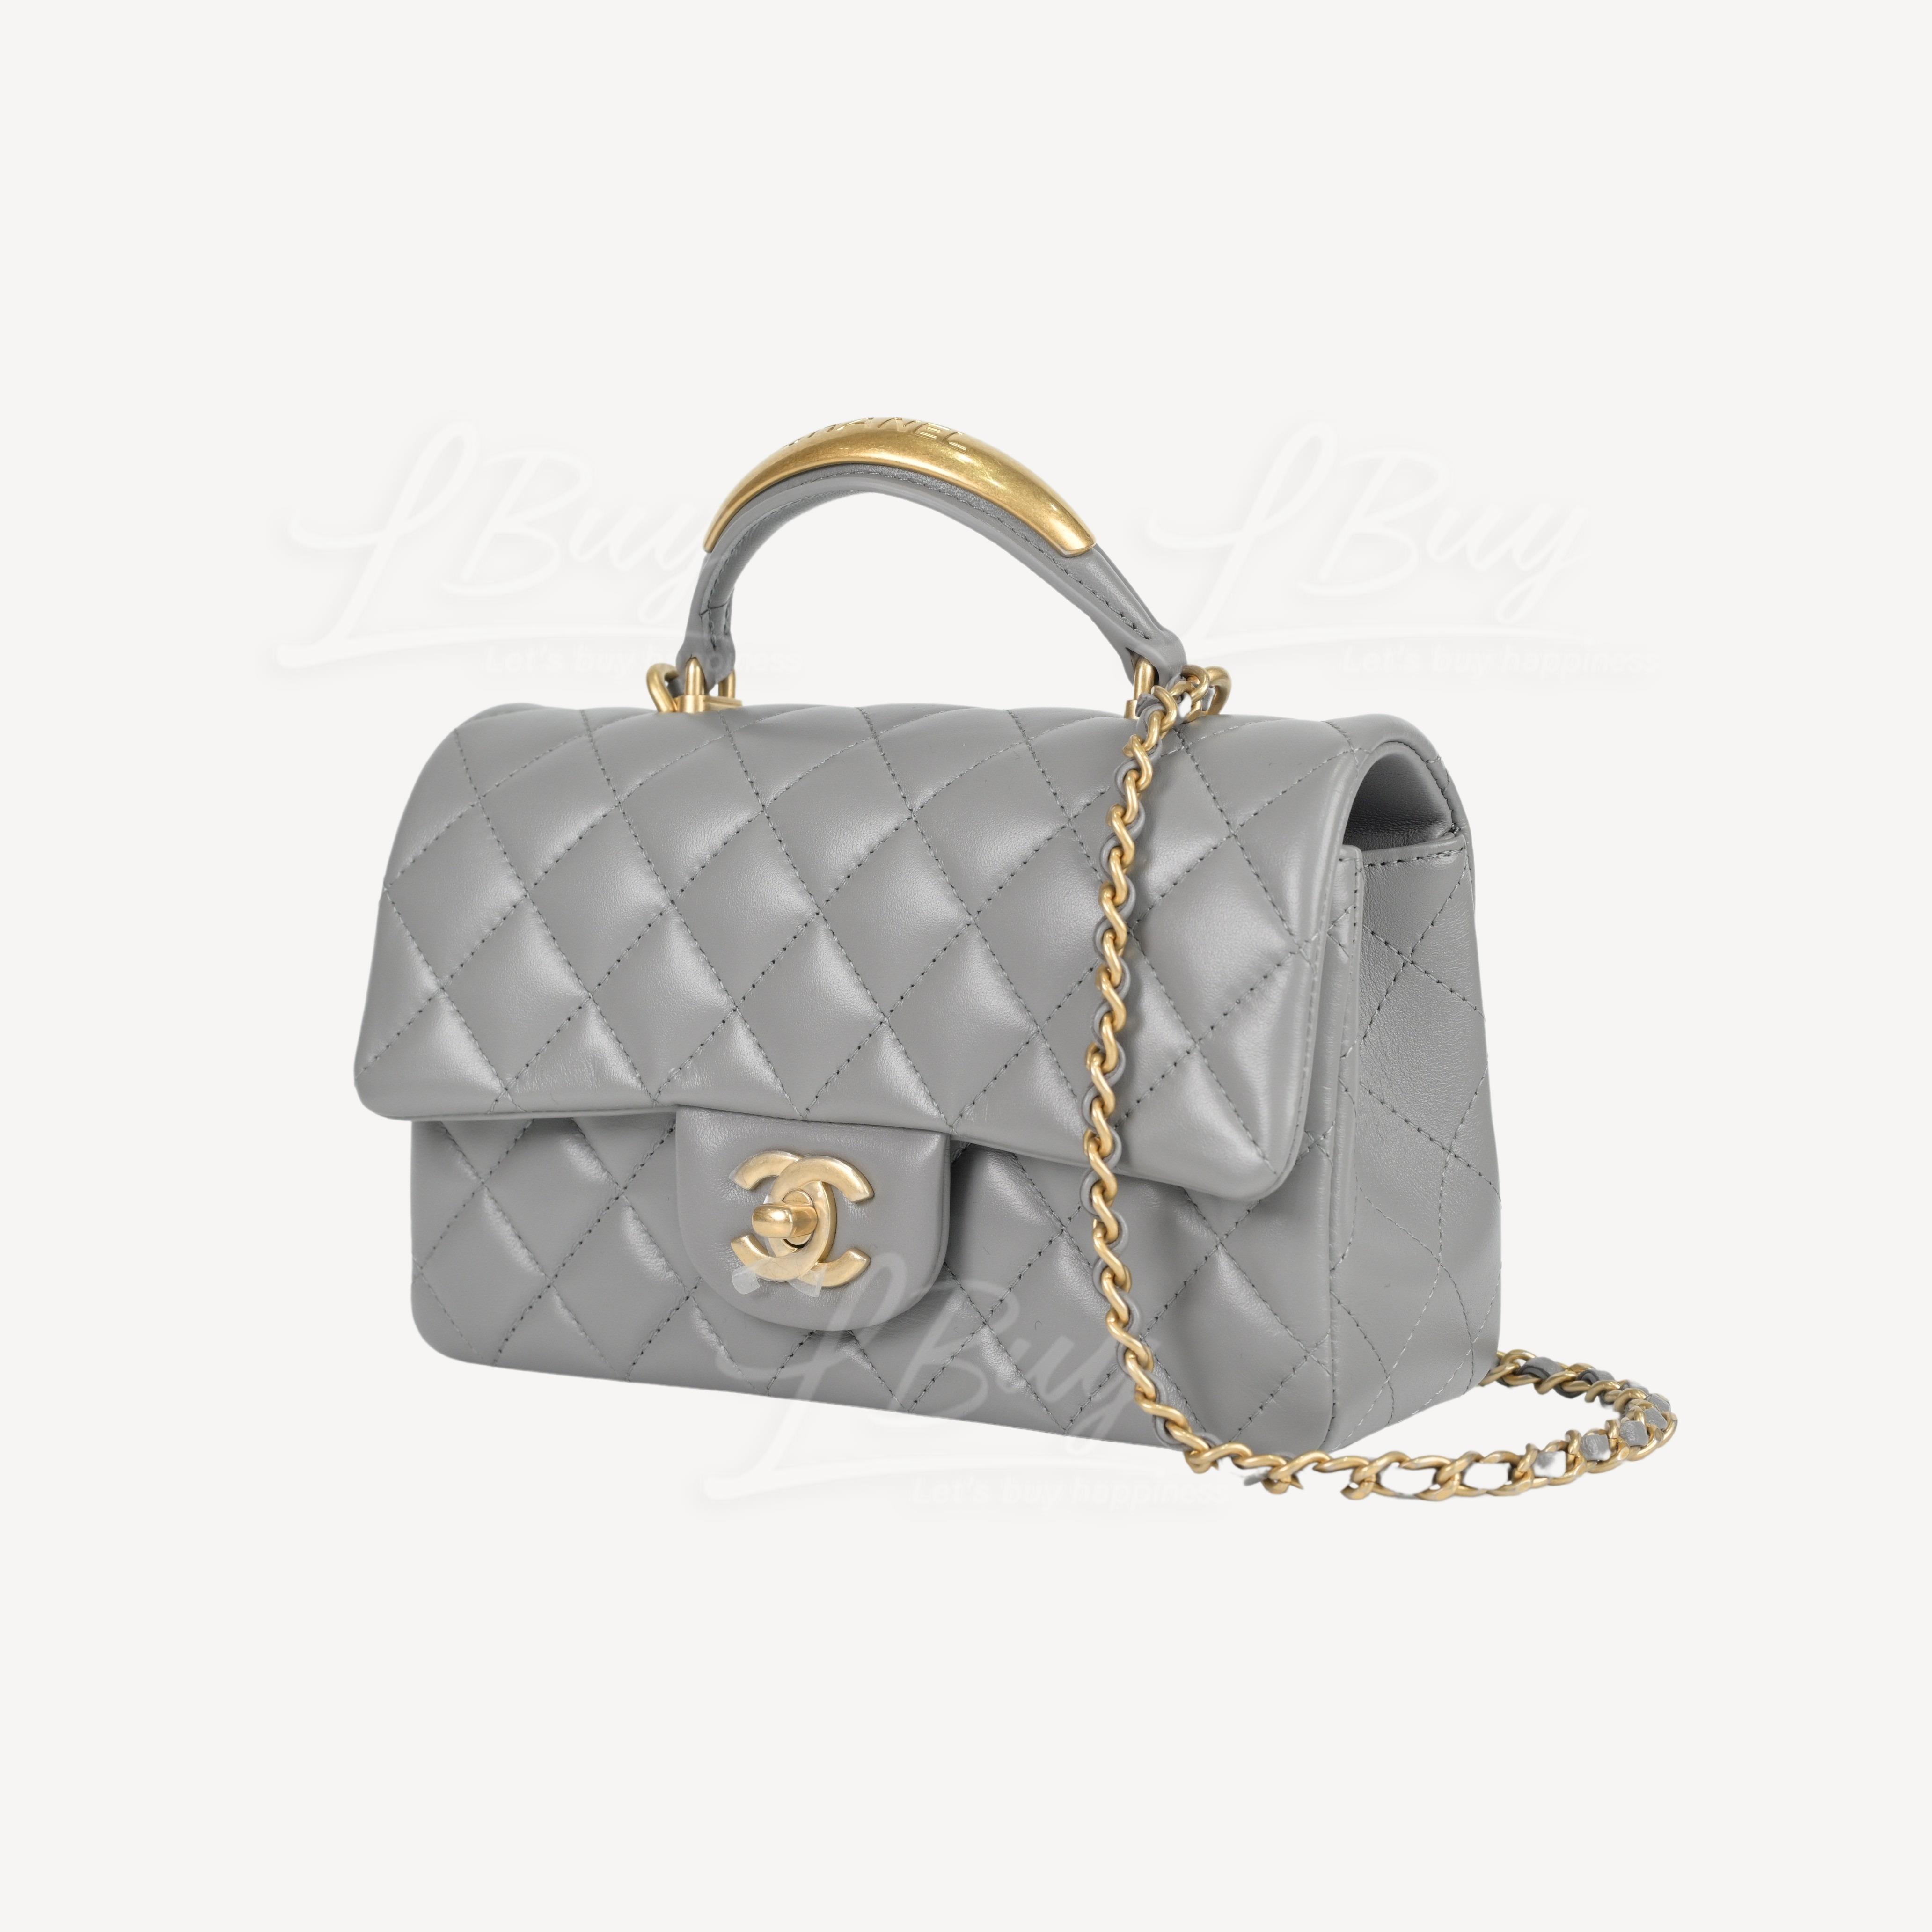 CHANEL-Chanel Grey Flap Bag with Gold Tone Metal and Gold Metal ...